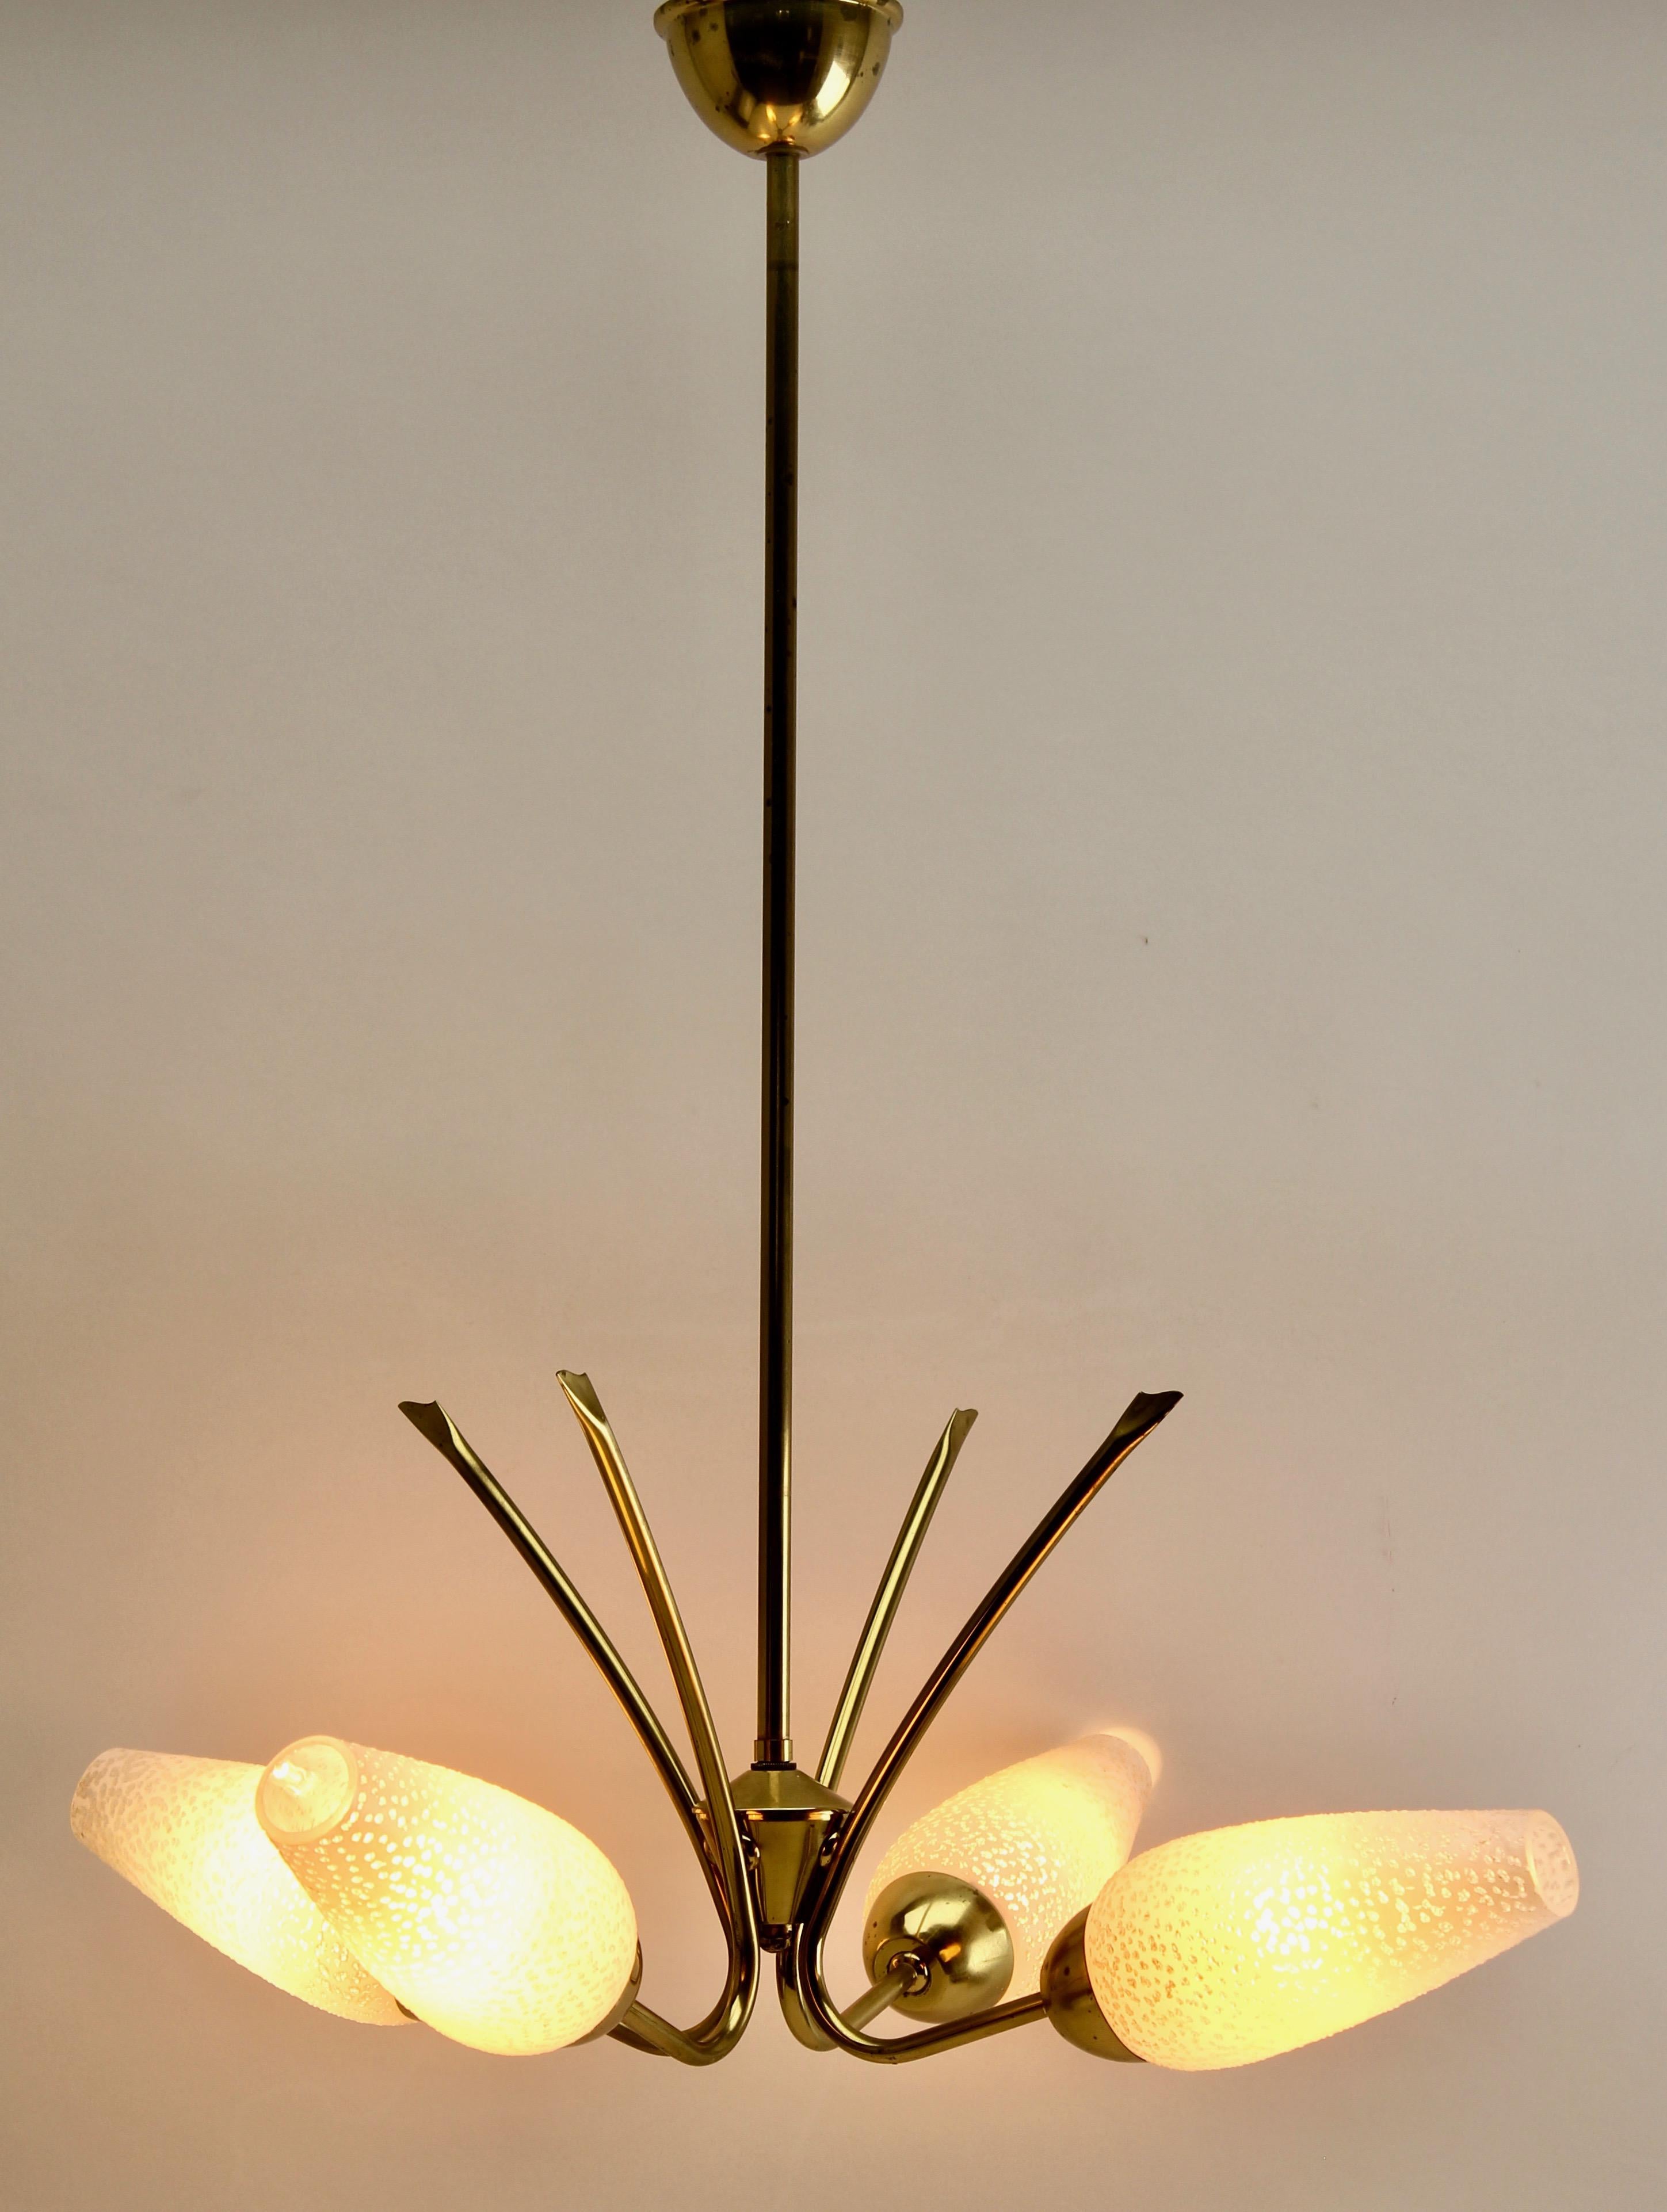 Hand-Crafted Vintage Chandelier Four Arms in the Style of Stilnovo, Italian, 1950s For Sale